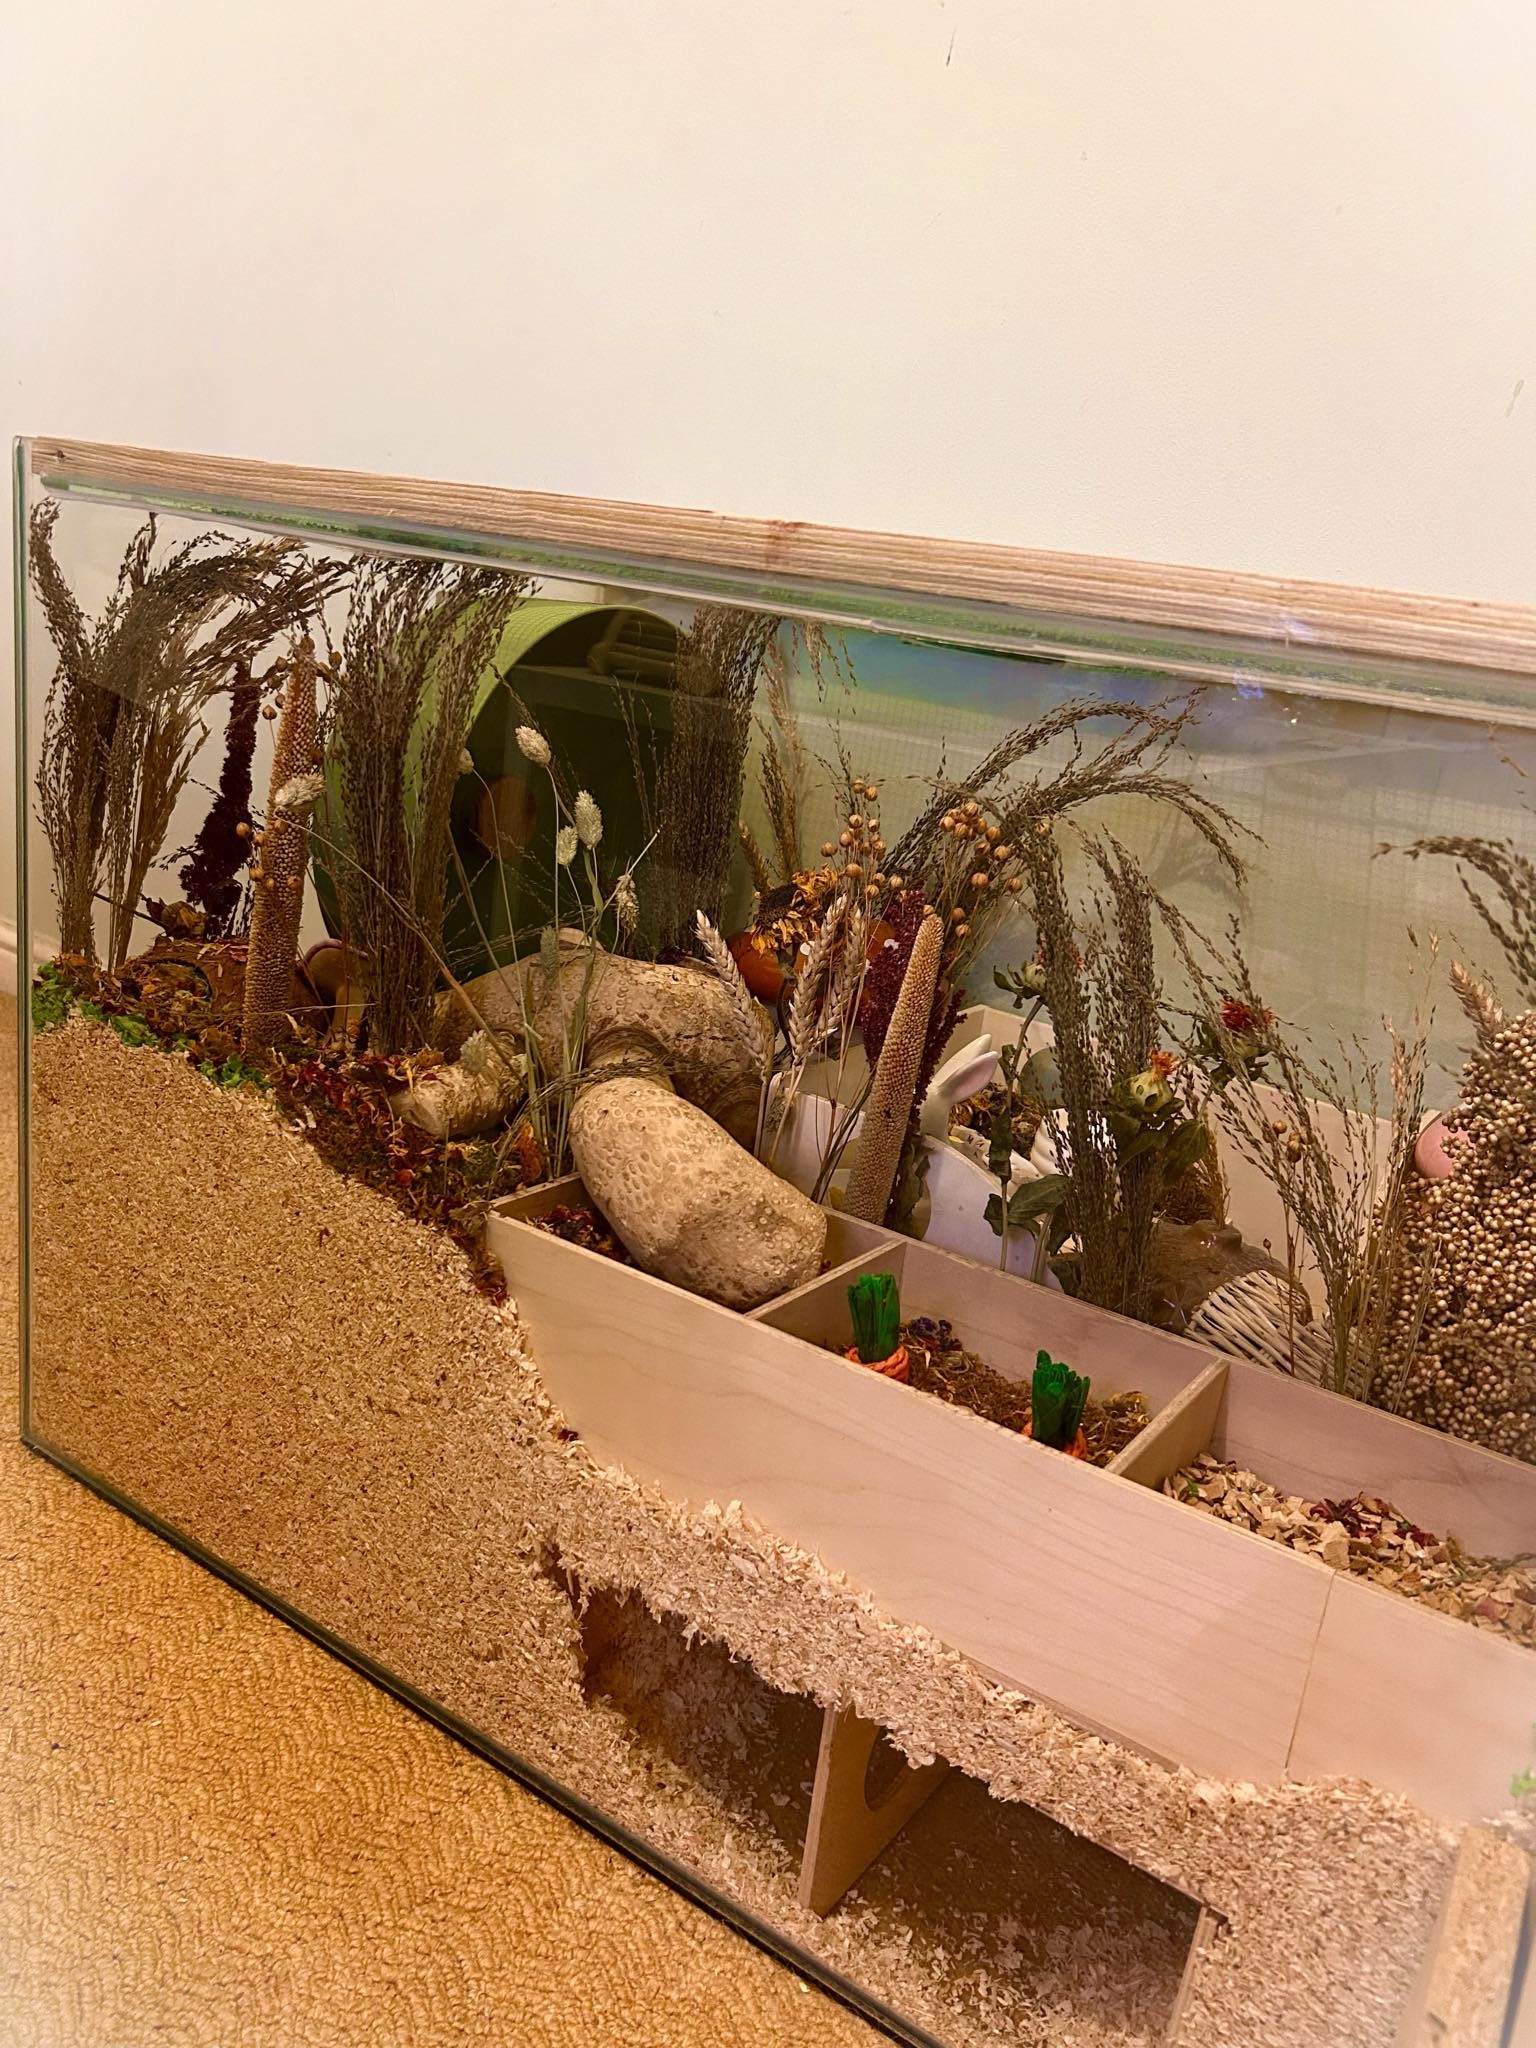 112cm x 50cm Tank with 14 inches of Bedding for a hamster